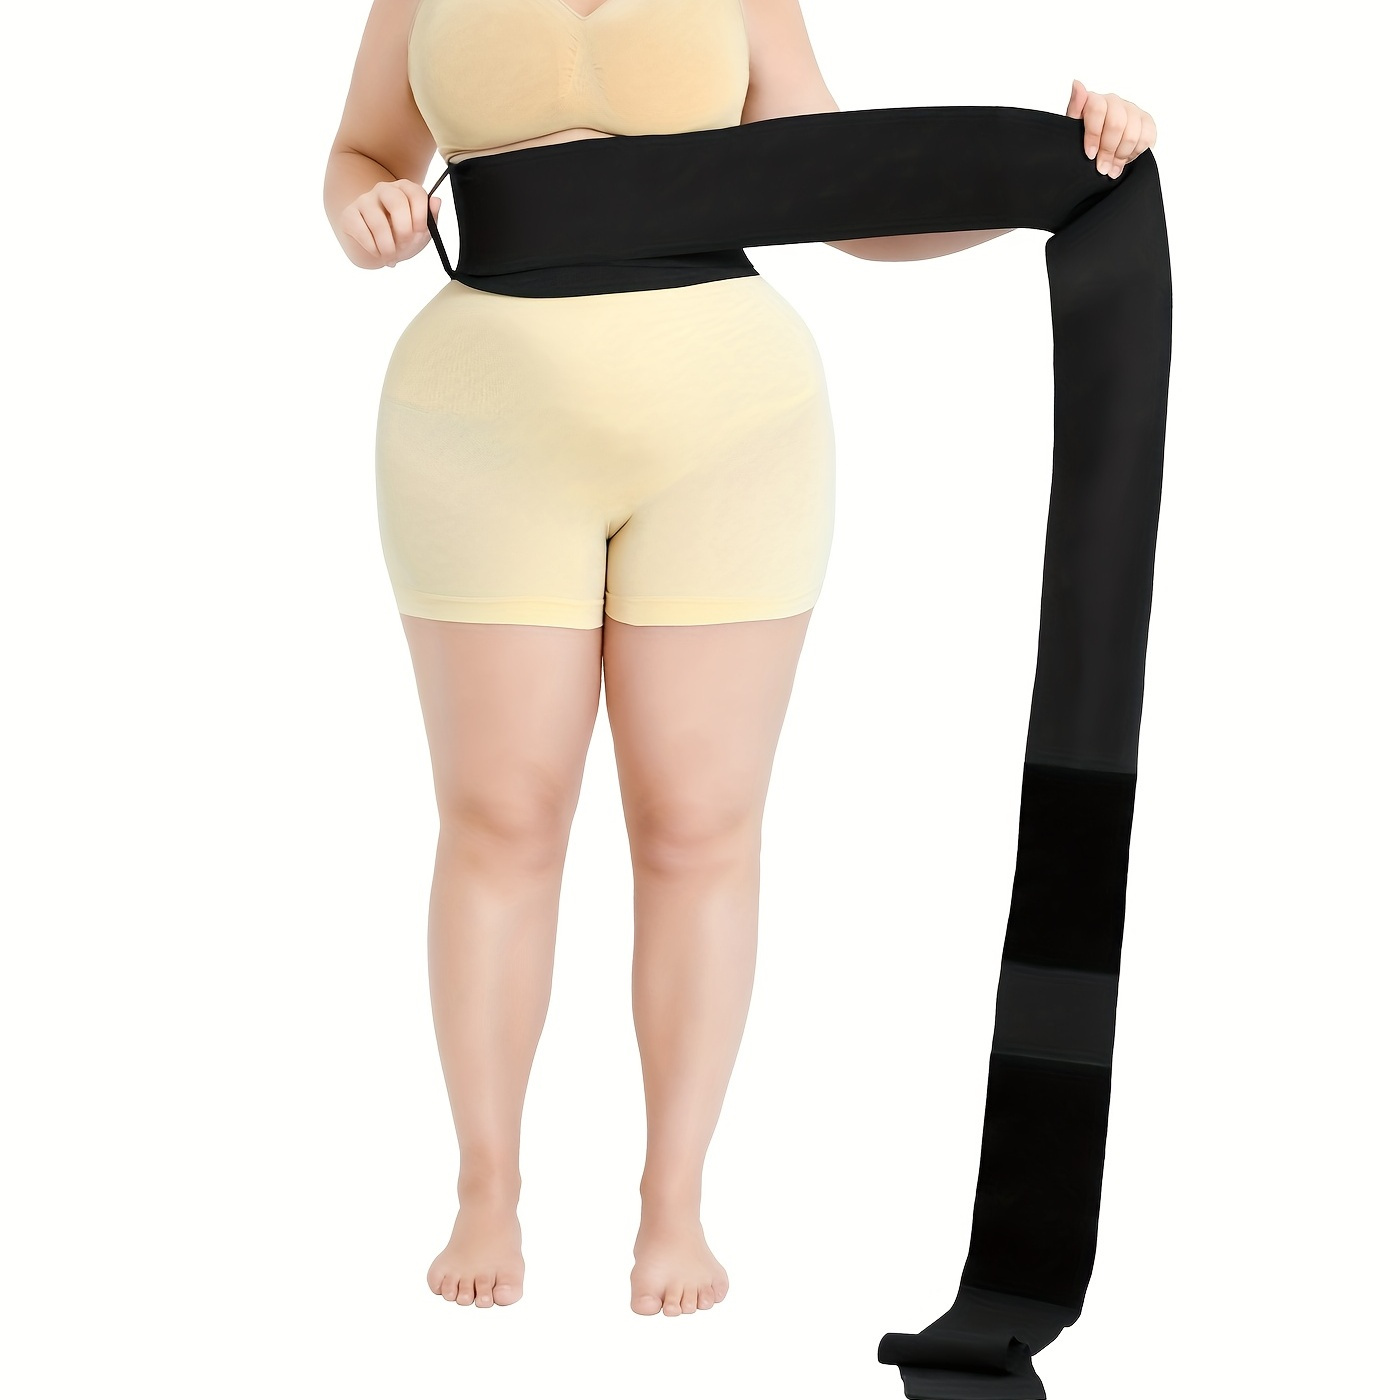 Vanadis Waist Trainer, Waist Shaping, Reduce Belly Fat And Back Fat,  Breathable and Comfortable